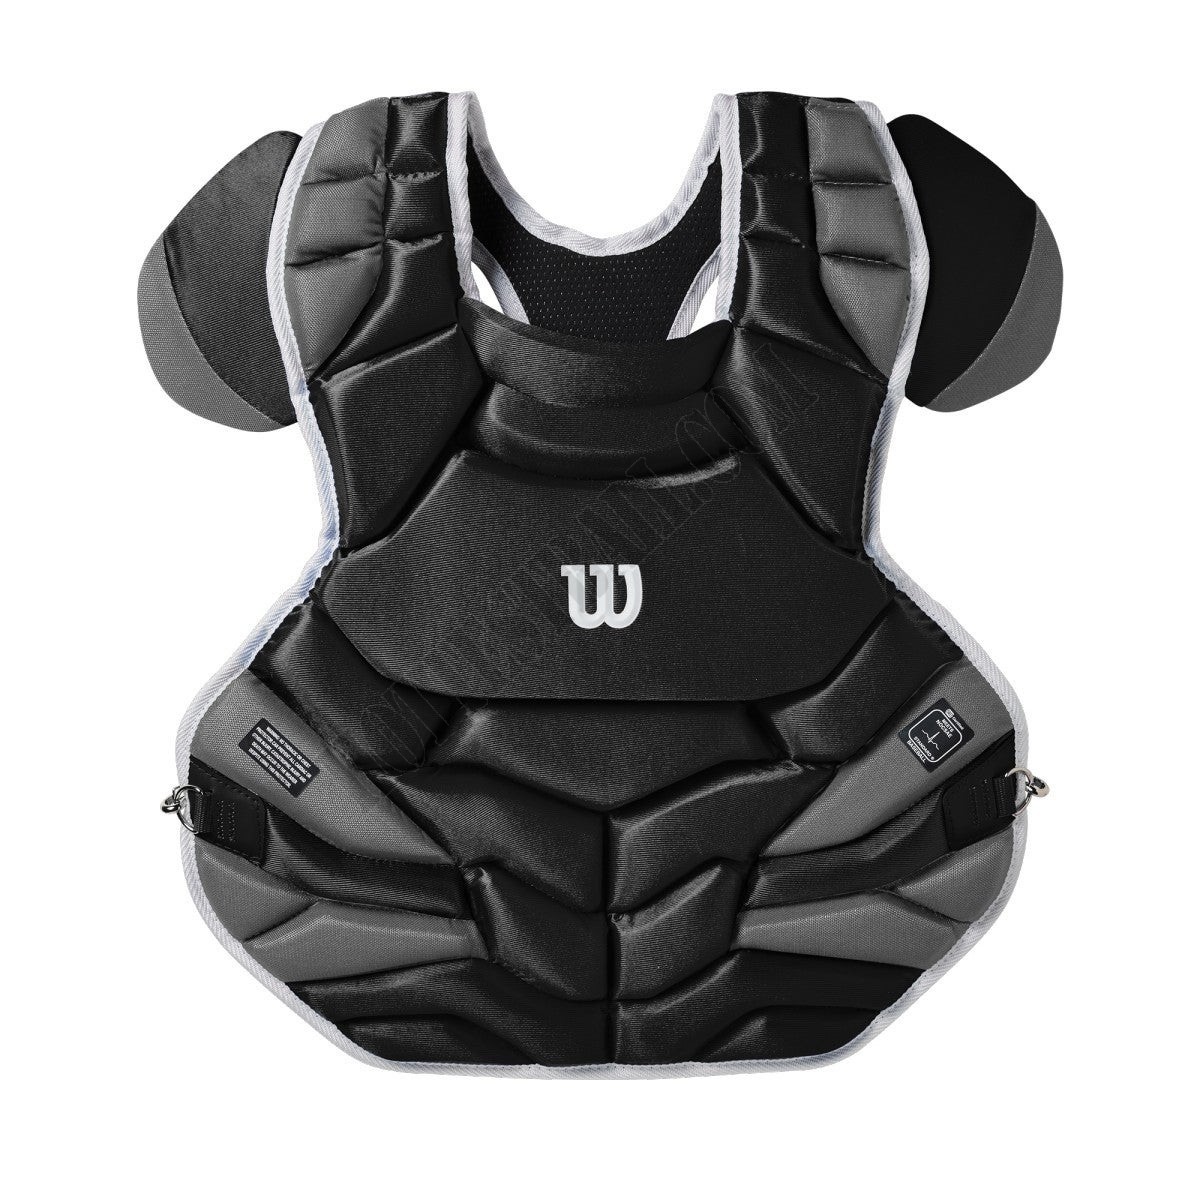 Wilson C1K NOCSAE Approved Chest Protector - Adult - Wilson Discount Store - Wilson C1K NOCSAE Approved Chest Protector - Adult - Wilson Discount Store